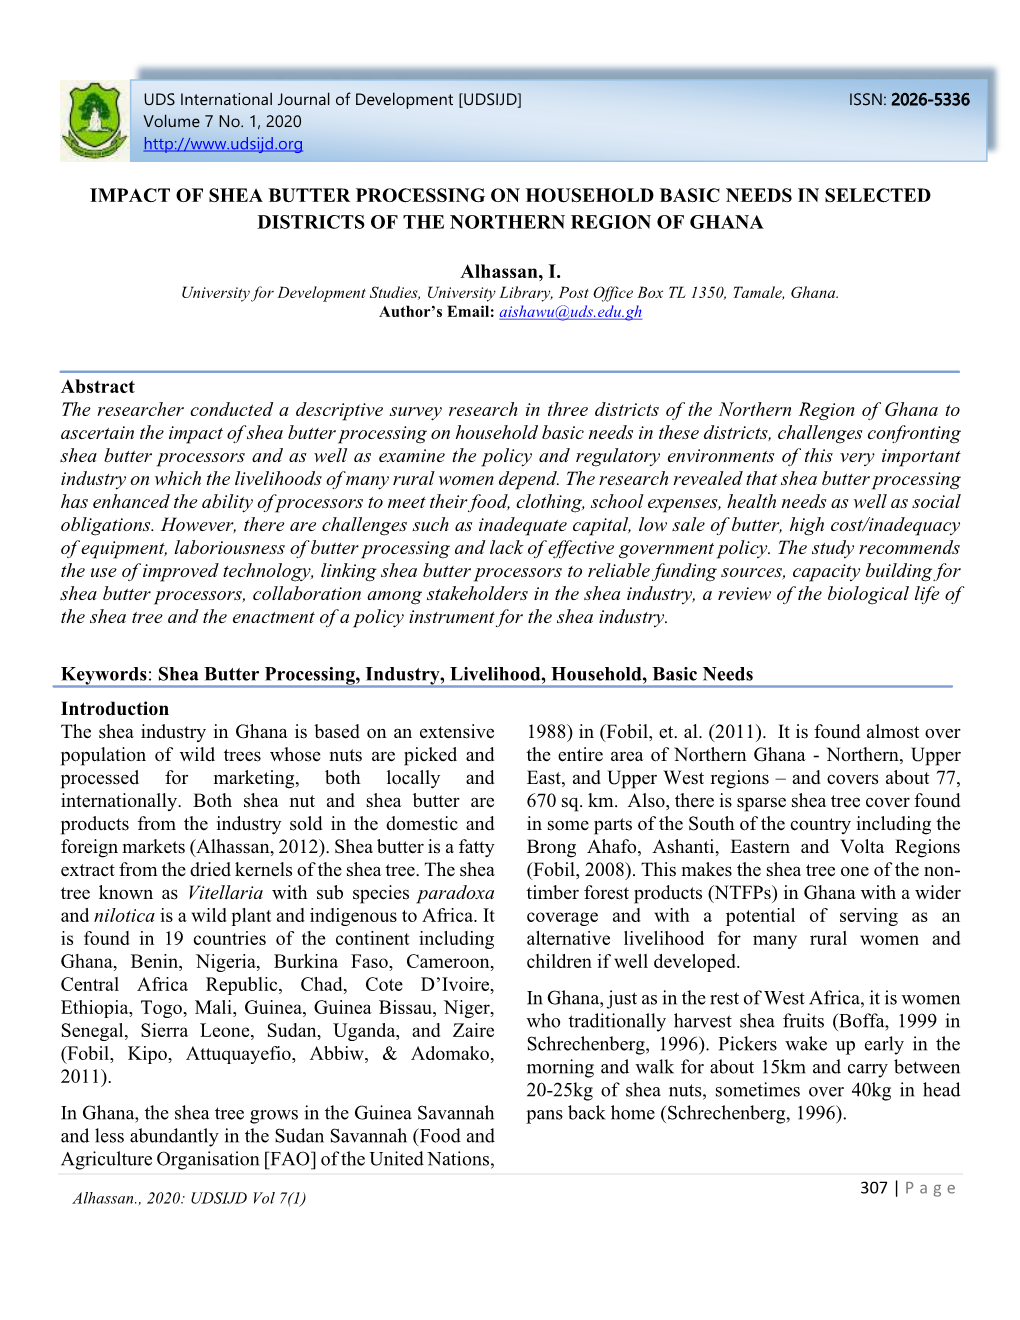 Impact of Shea Butter Processing on Household Basic Needs in Selected Districts of the Northern Region of Ghana